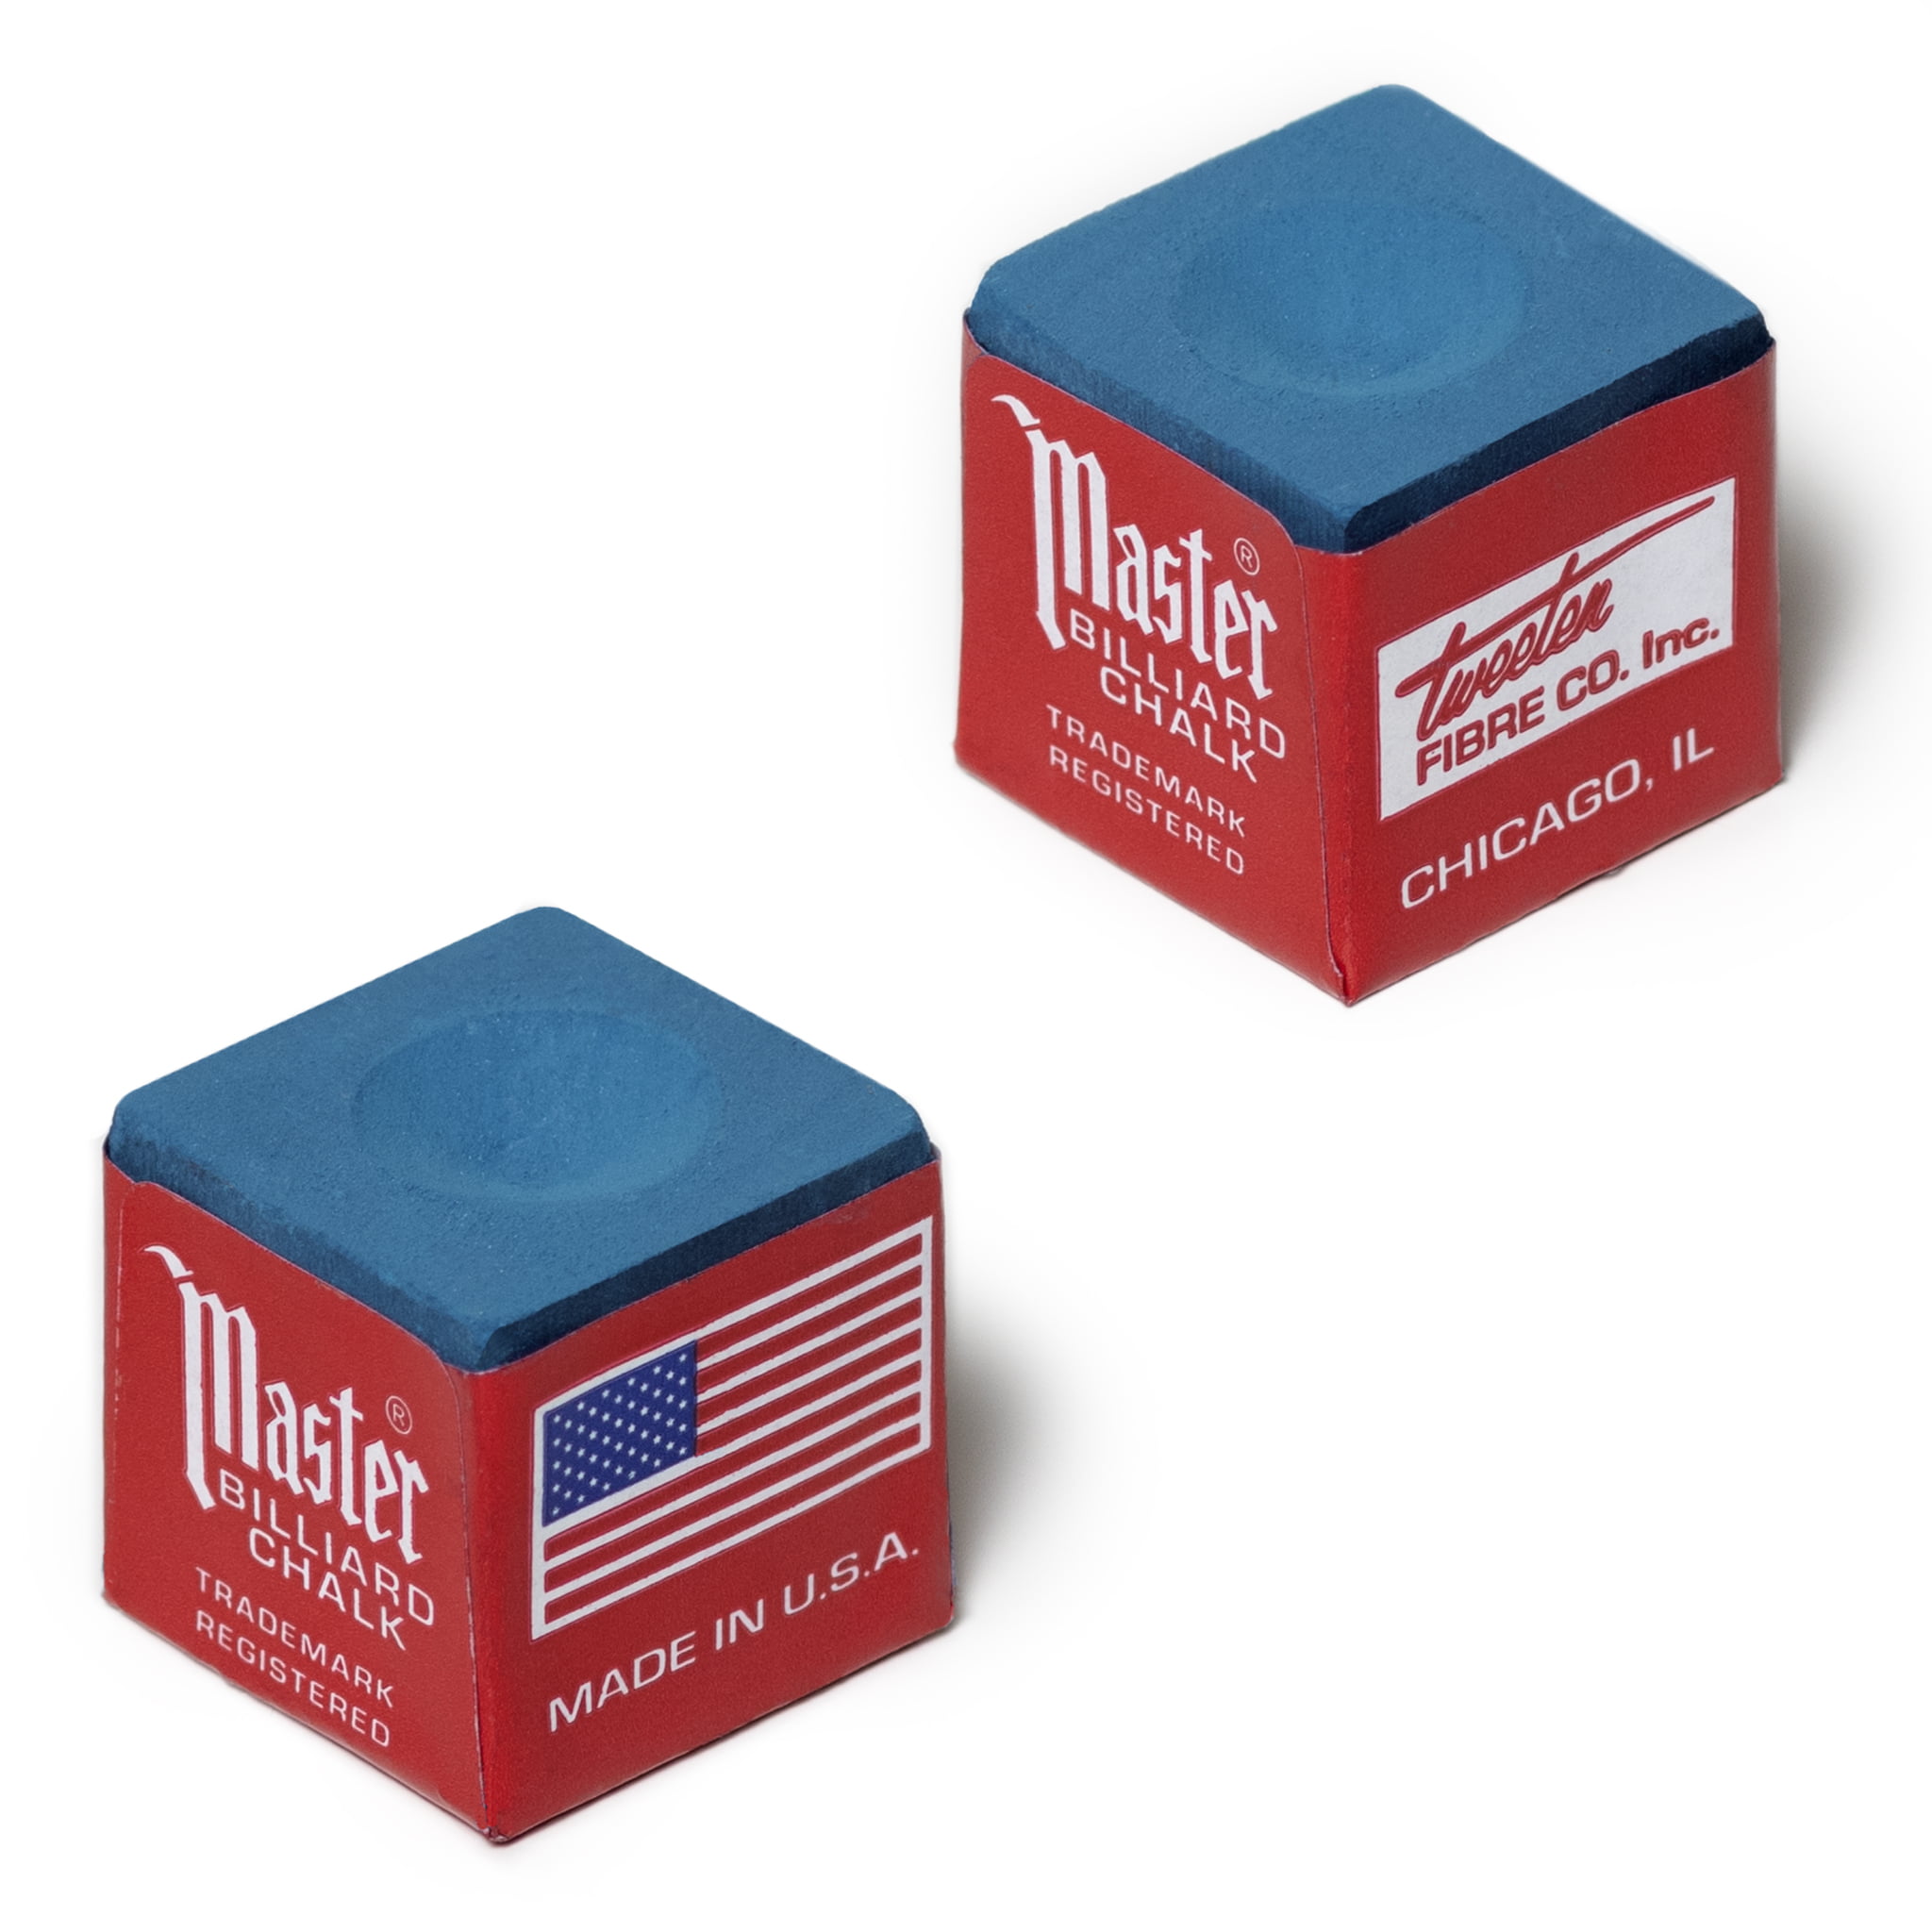 New Master Chalk - 2 Pack - Mini Box - 2 Pieces of Master's Blue Chalk